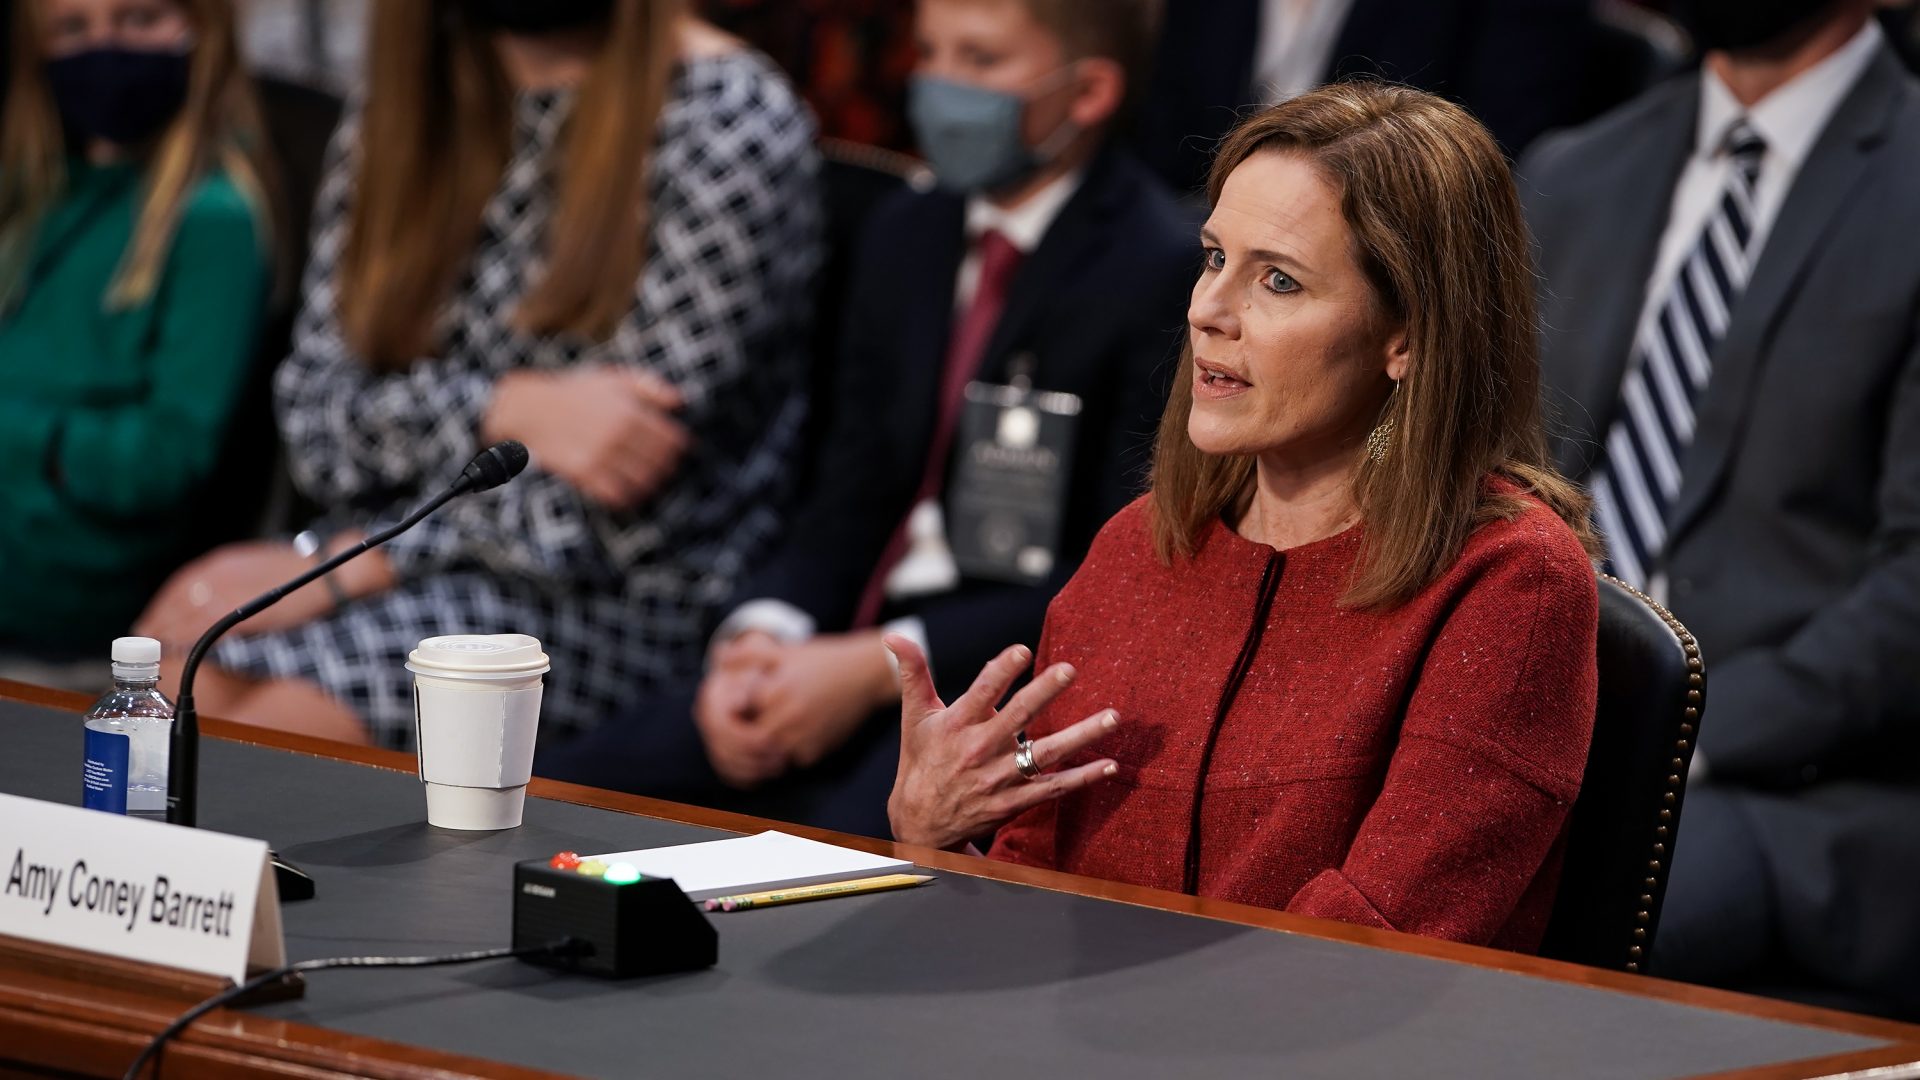 President Trump's Supreme Court nominee Judge Amy Coney Barrett testifies during the second day of her Senate Judiciary confirmation hearing on Tuesday.